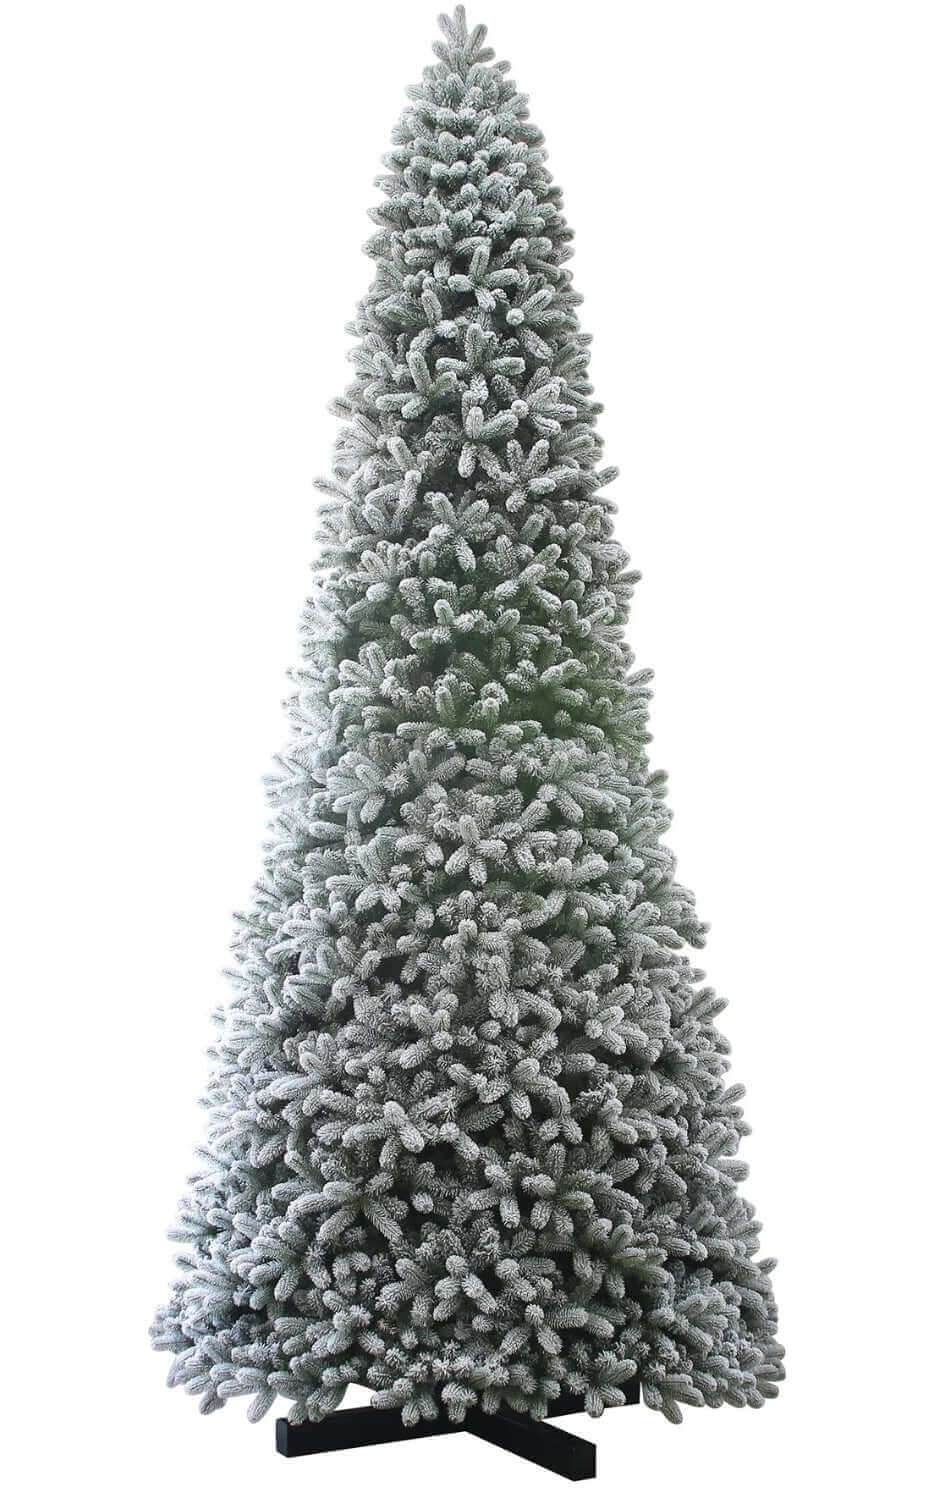 King of Christmas 15 Foot King Flock® Quick-Shape Artificial Christmas Tree with 2000 Warm White LED Lights